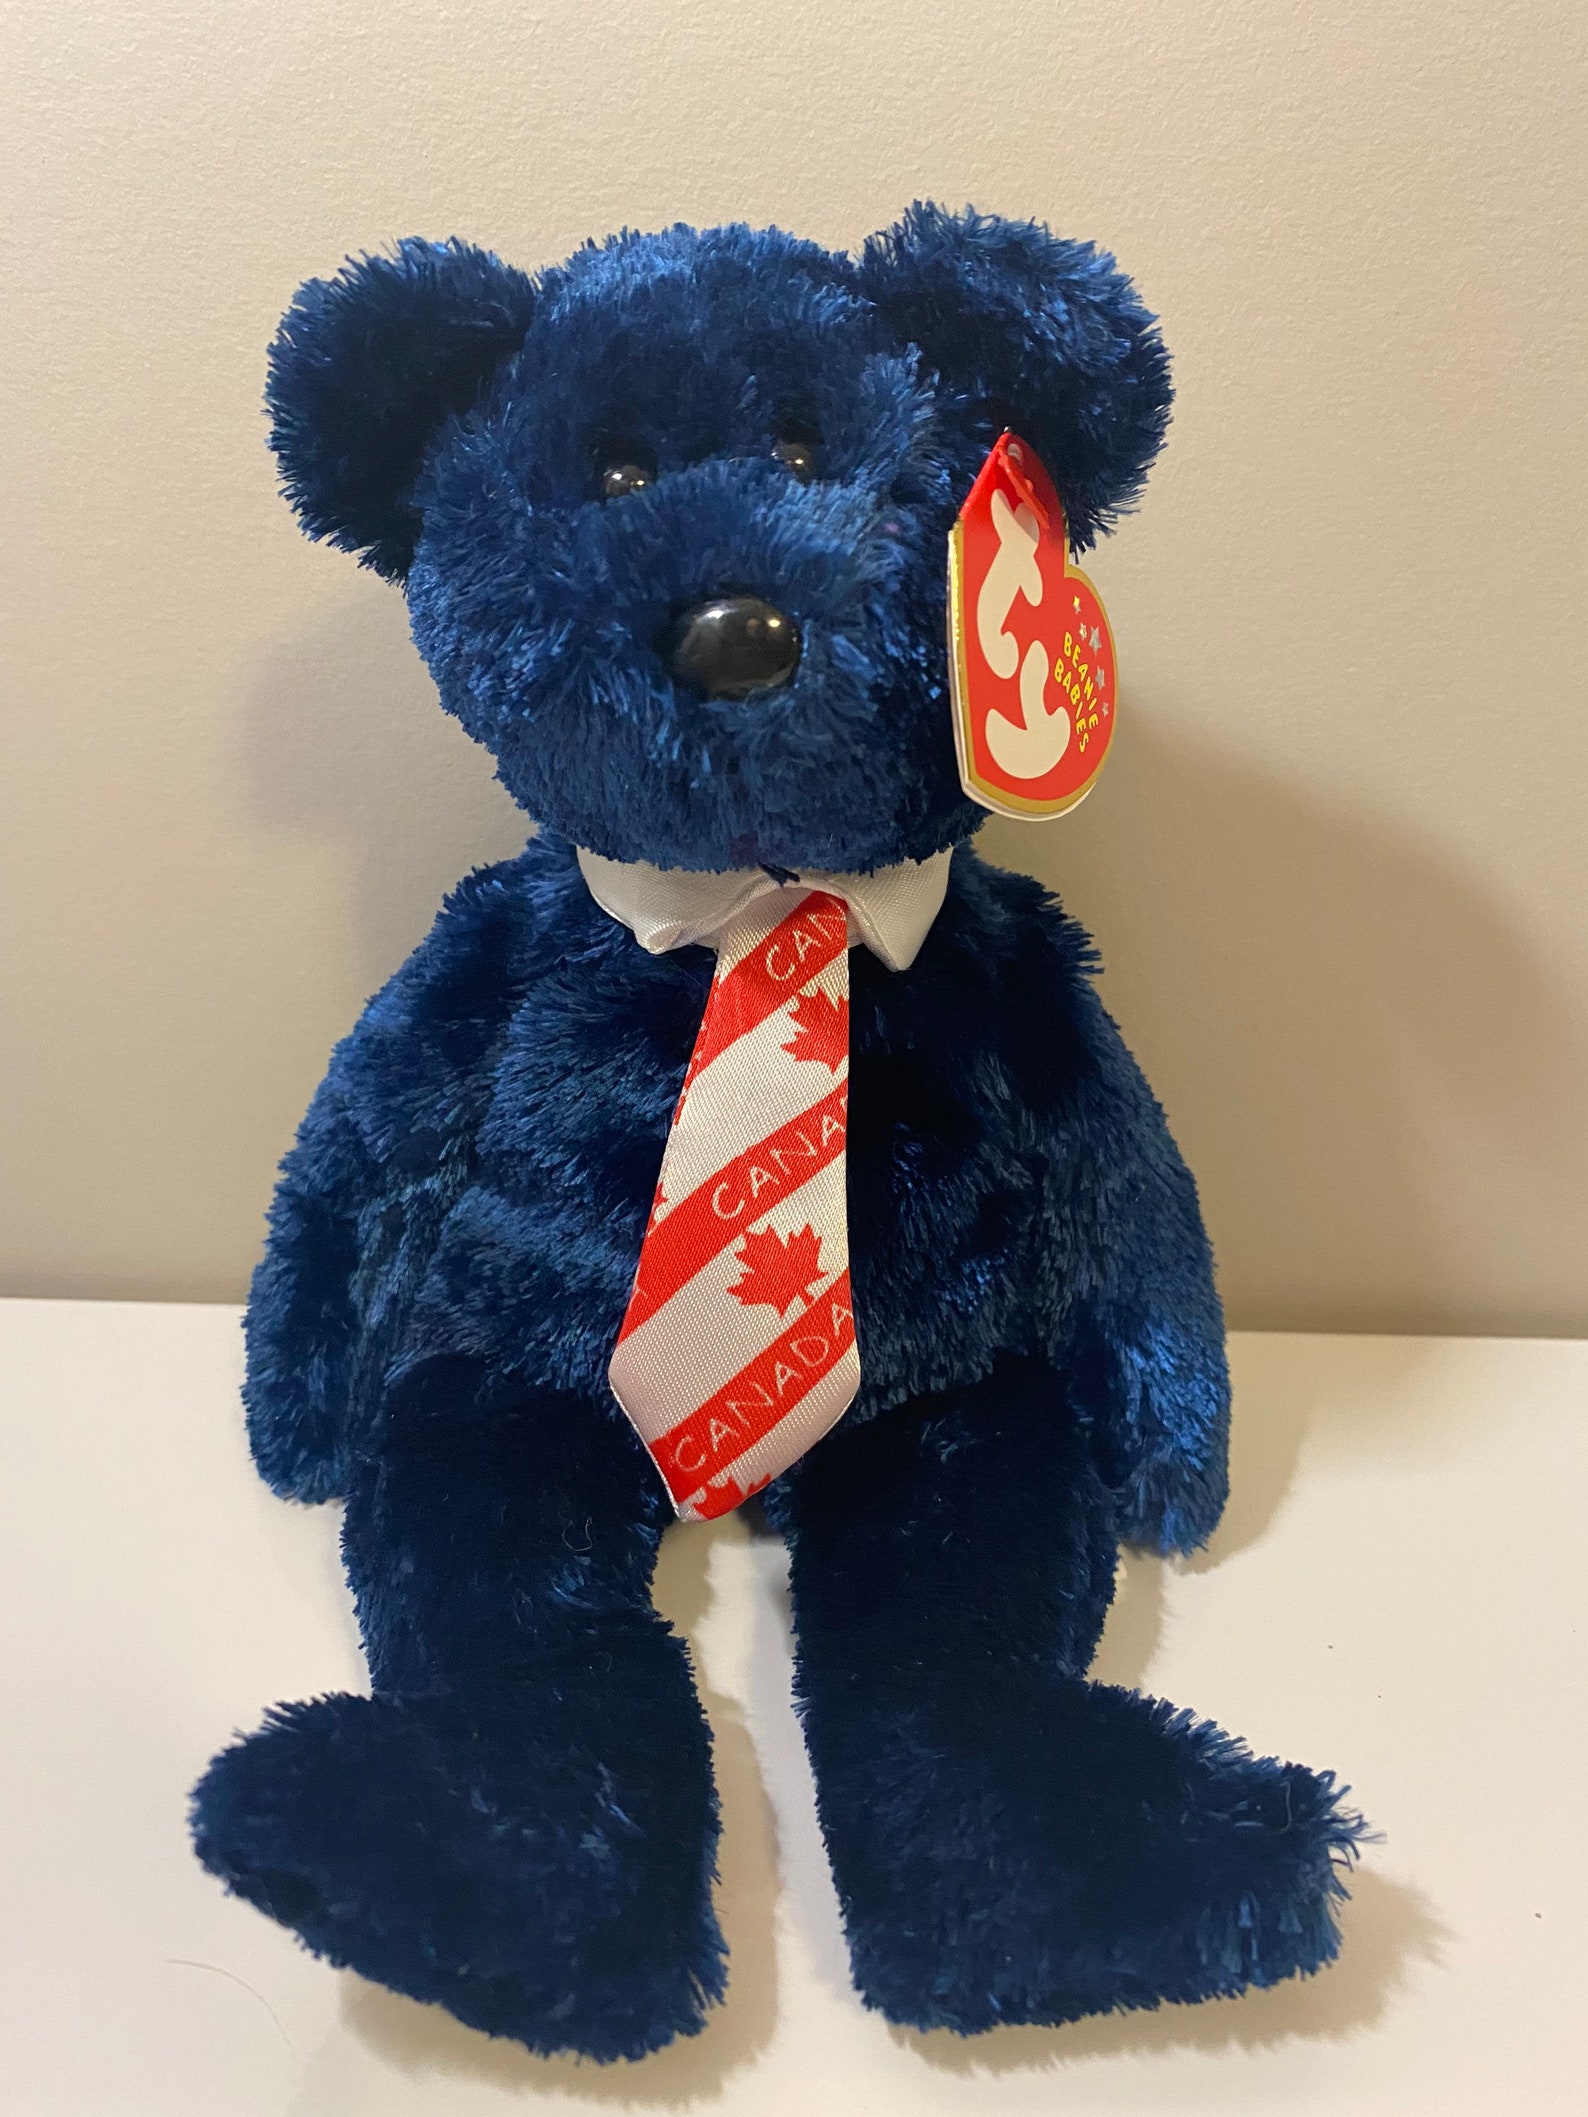 TY Beanie Baby Pops the Fathers Day Bear available in all 3 | Etsy